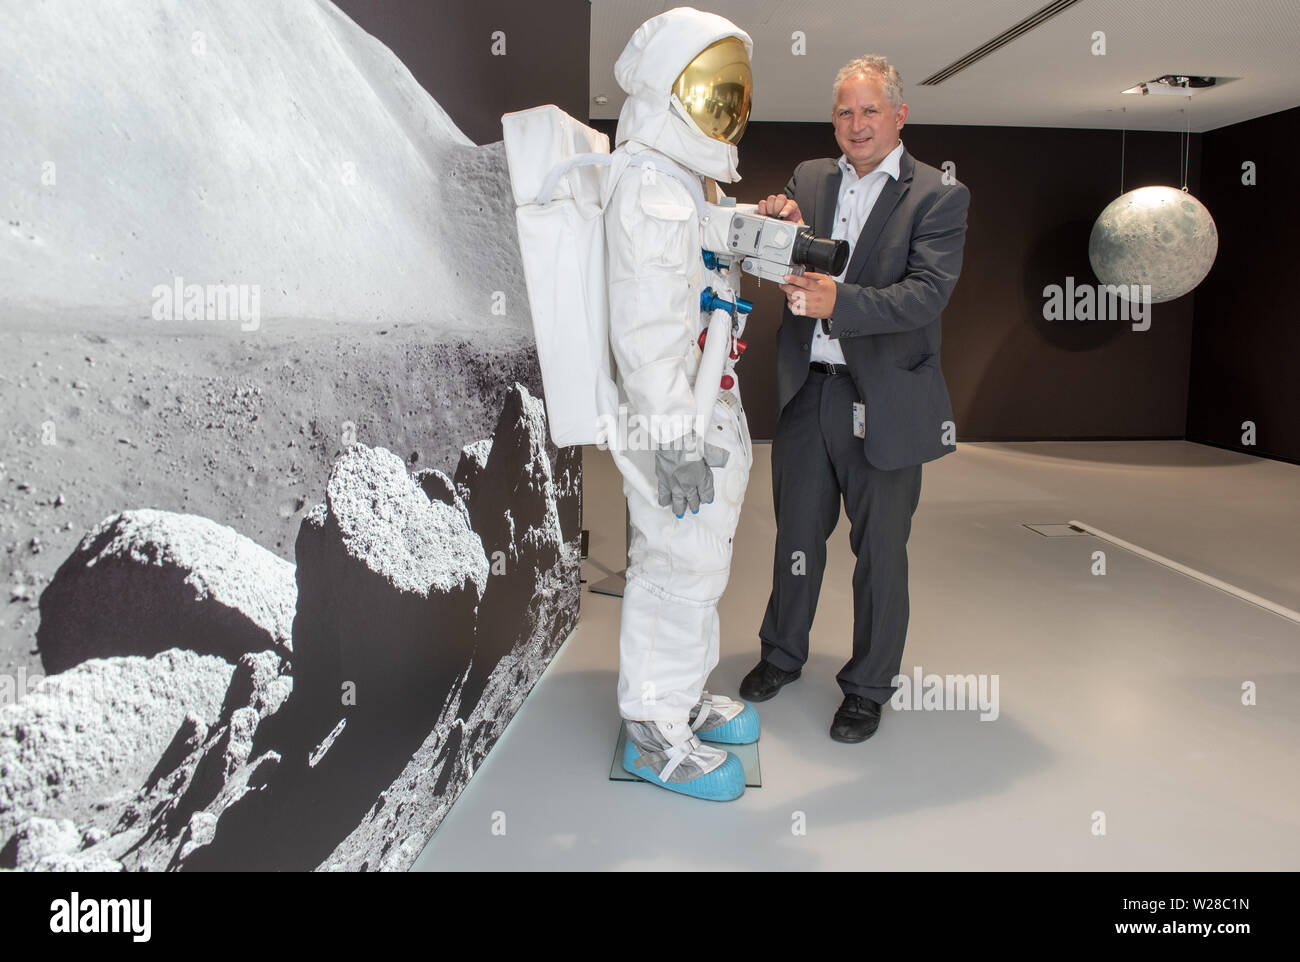 Oberkochen, Germany. 01st July, 2019. Vladan Blahnik, head of lens development, stands next to a space suit in the Zeiss Museum, which is fitted with a Hasselblad medium-format camera with a Zeiss lens. The Swabian company developed special lenses for the NASA Moonlight Program, with which, among other things, the first photos were taken on the moon in July 1969. (to dpa: 'Lenses for the moon' - lenses of the Apollo flights came from Swabia') Credit: Stefan Puchner/dpa/Alamy Live News Stock Photo